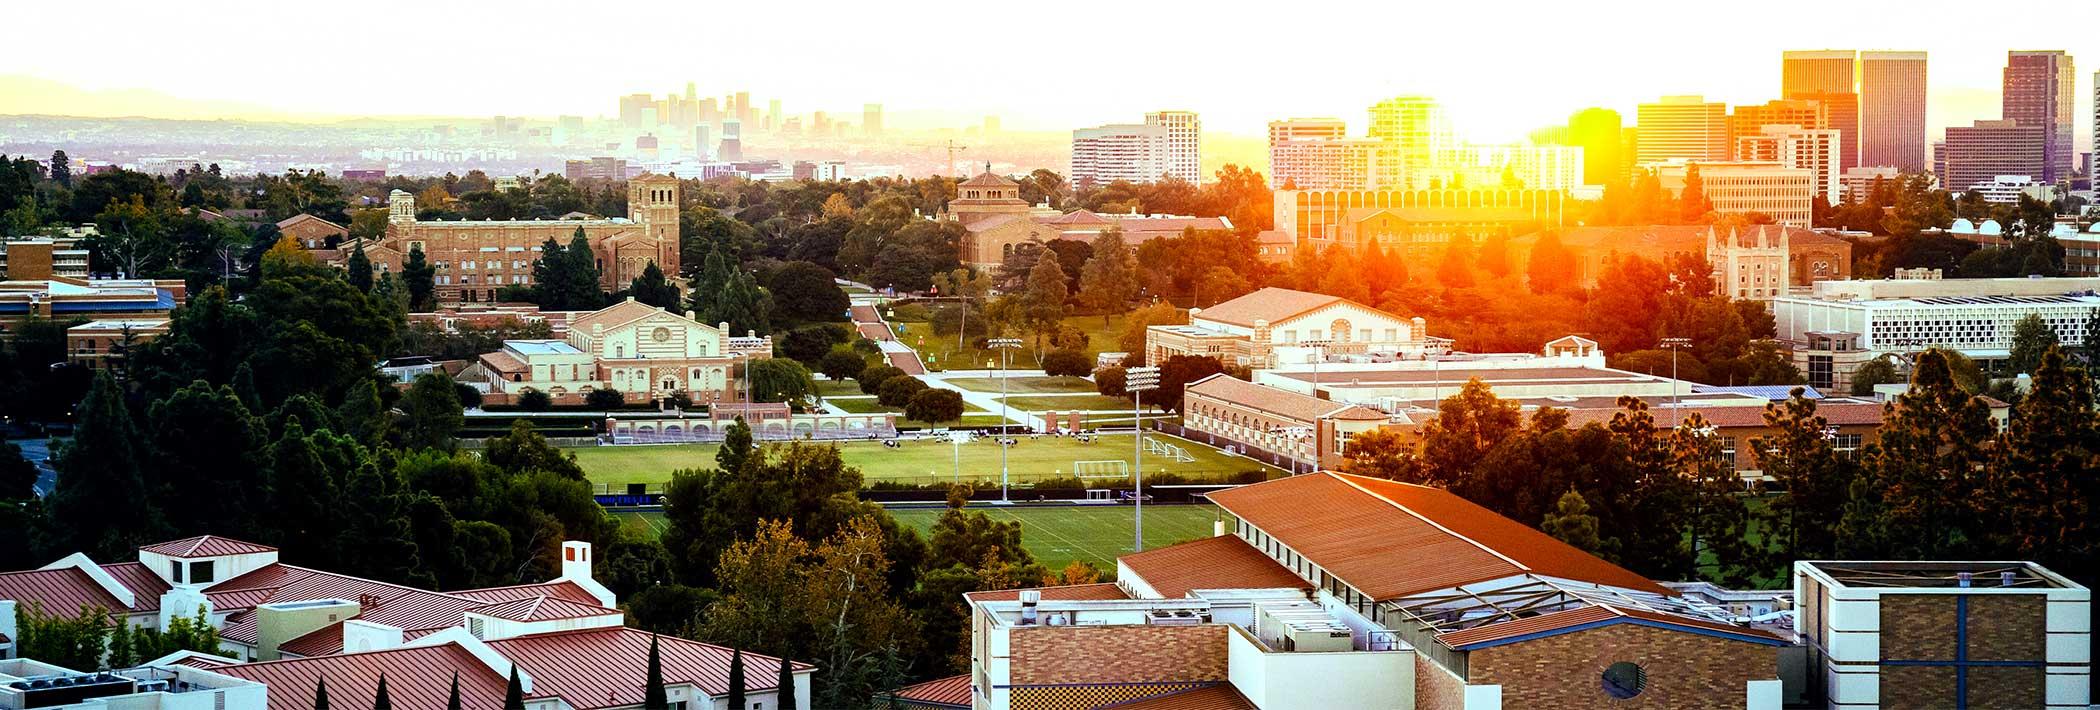 The sun rises over UCLA's beautiful campus and residential buildings.